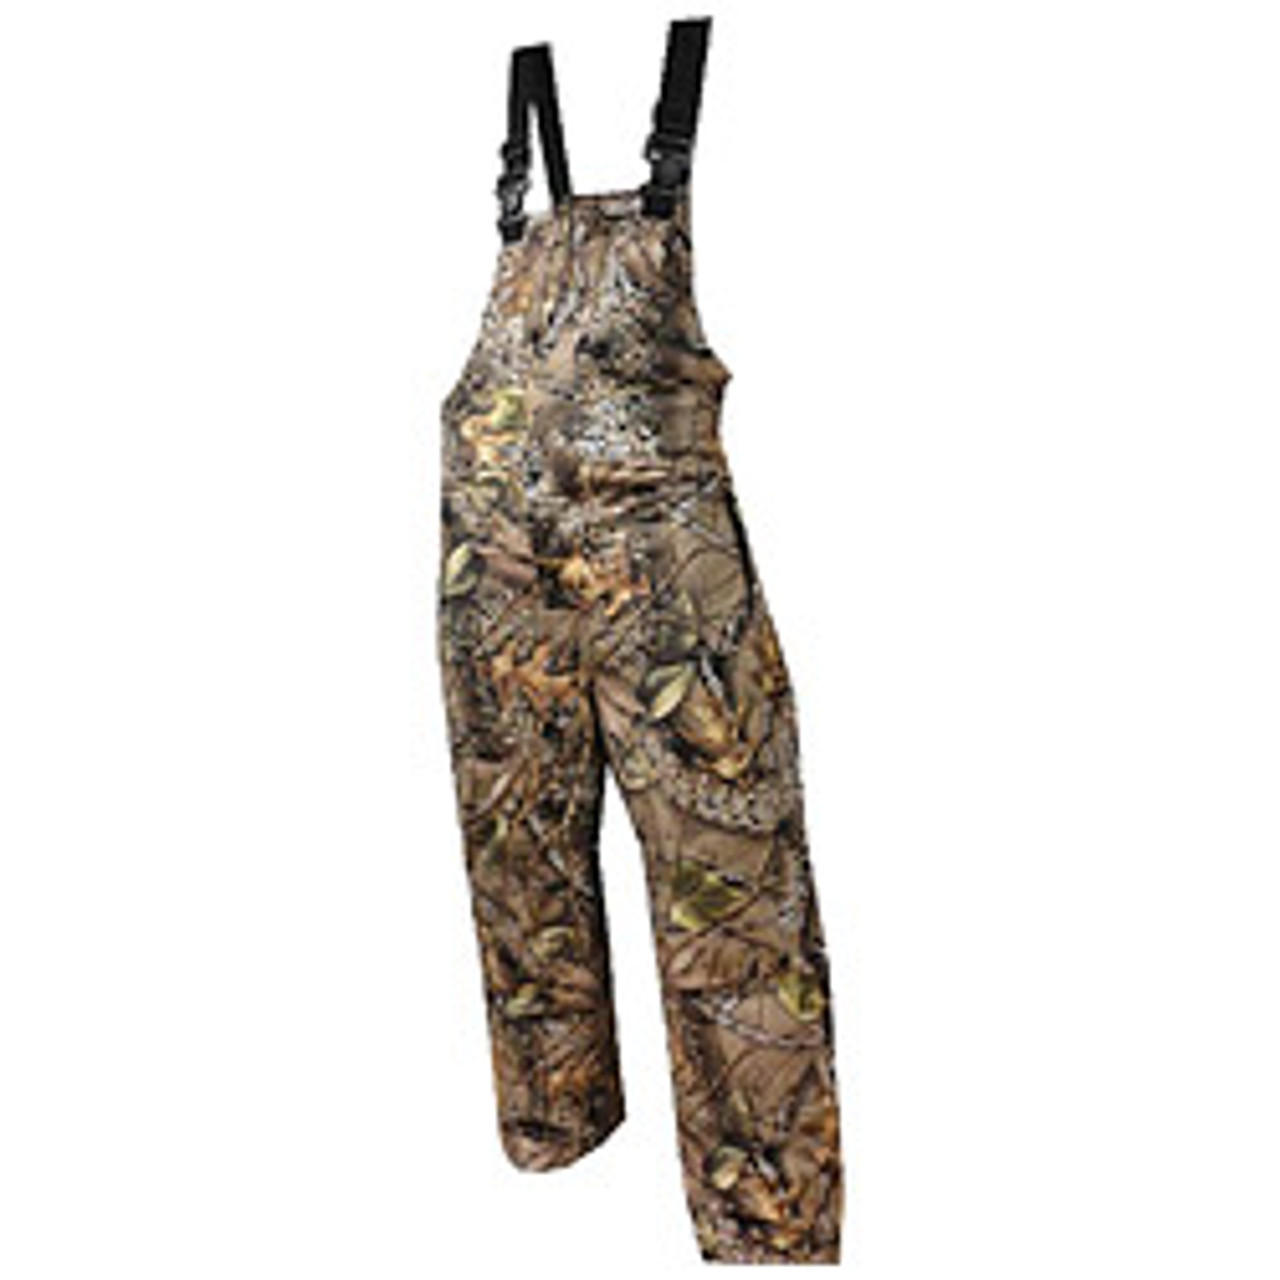 Camo Insulated Waterproof Bibs by World Famous Sports